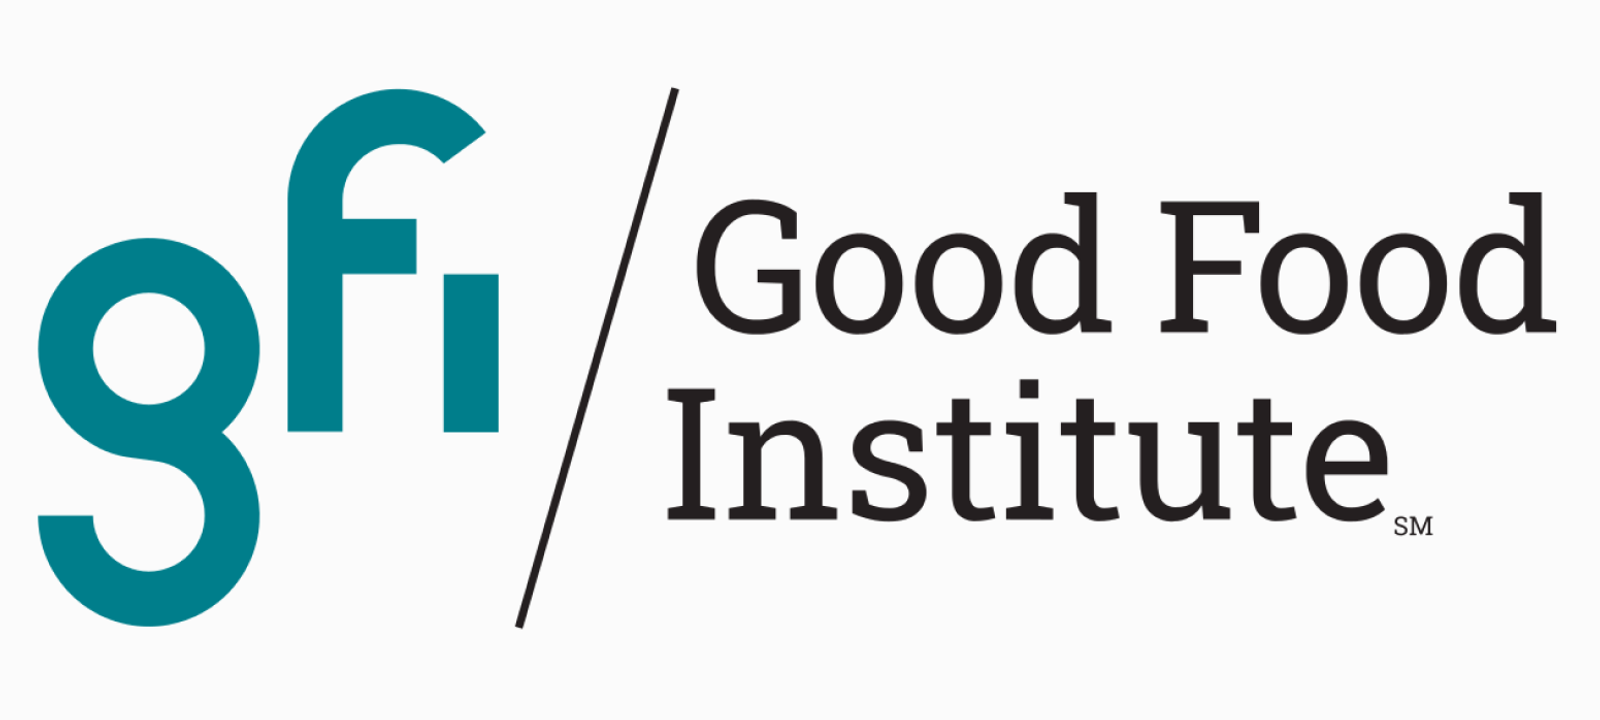 Election Candidate: Good Food Institute